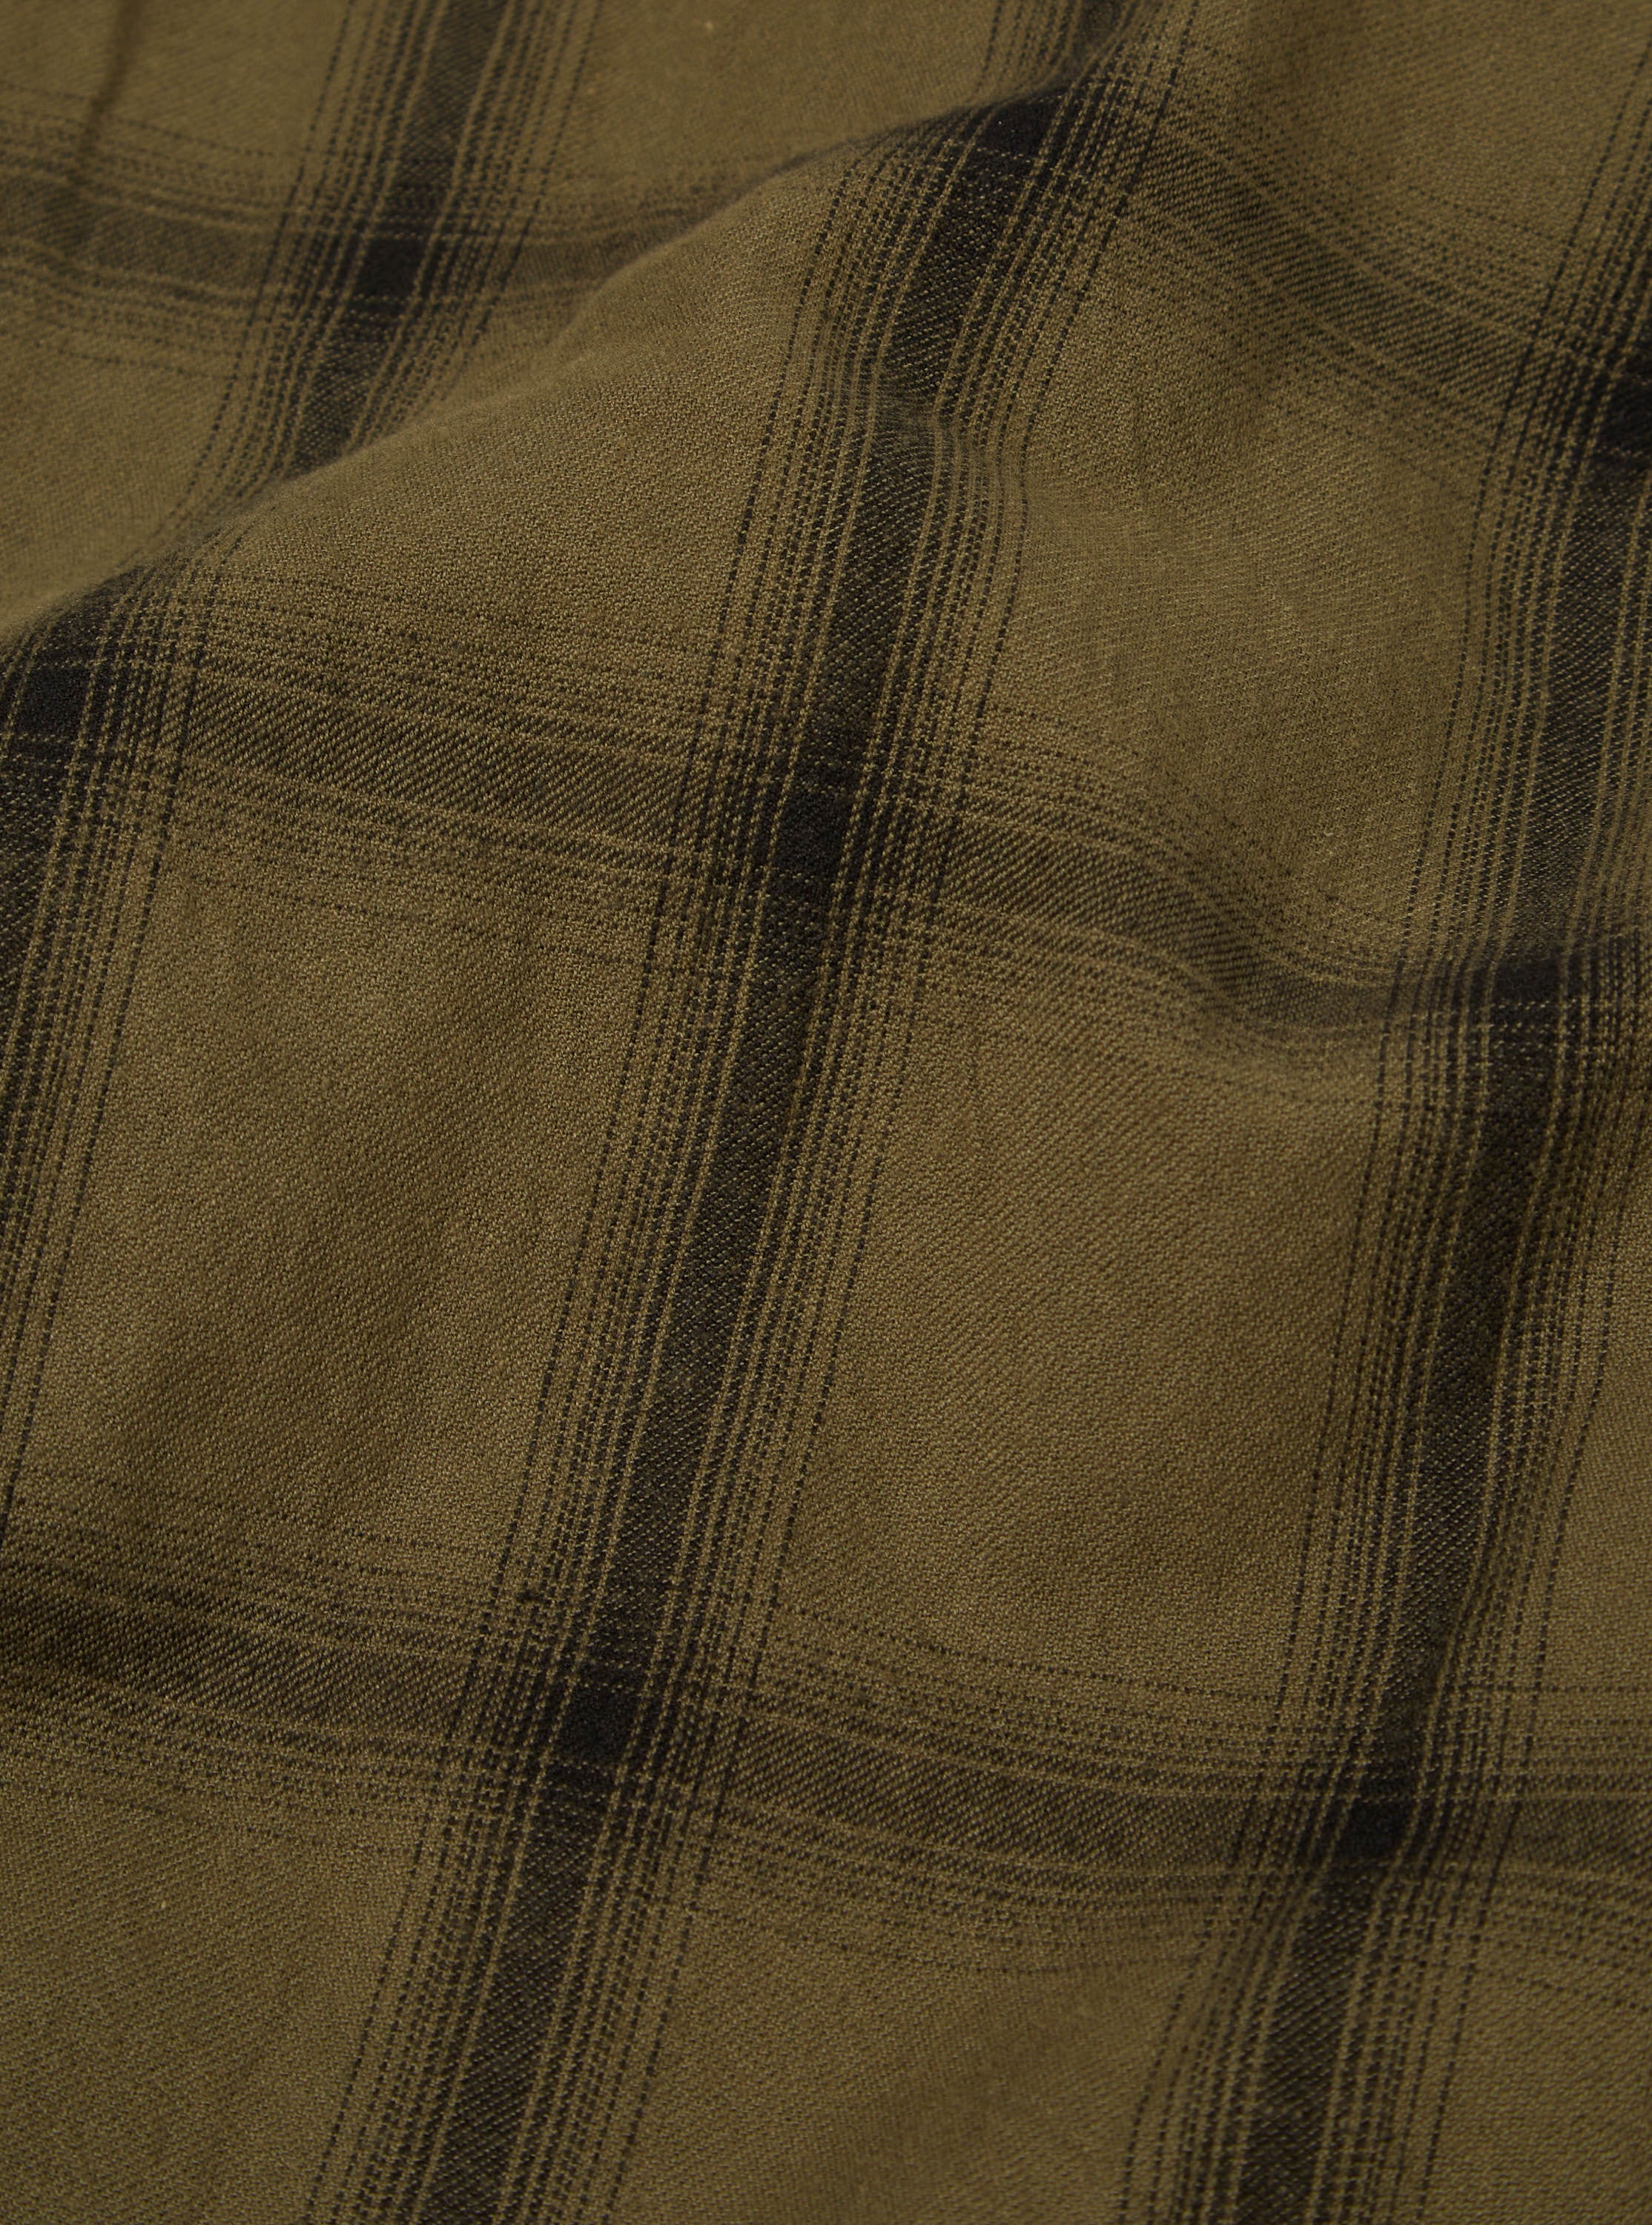 Universal Works Square Pocket Shirt in Olive Shadow Check